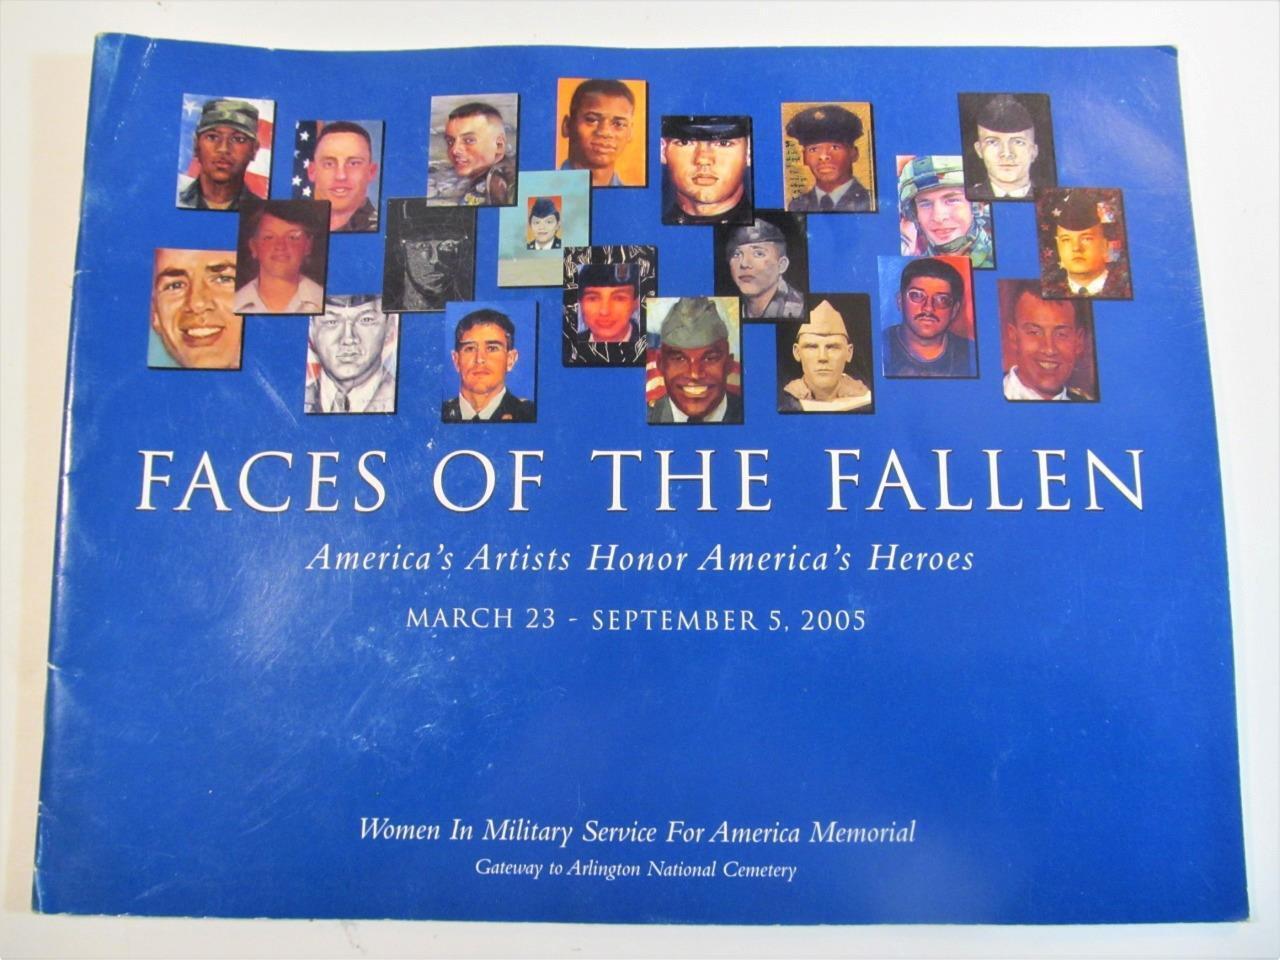 USA War Heroes FACES OF THE FALLEN Iraq Afghanistan Wars Artist Portraits